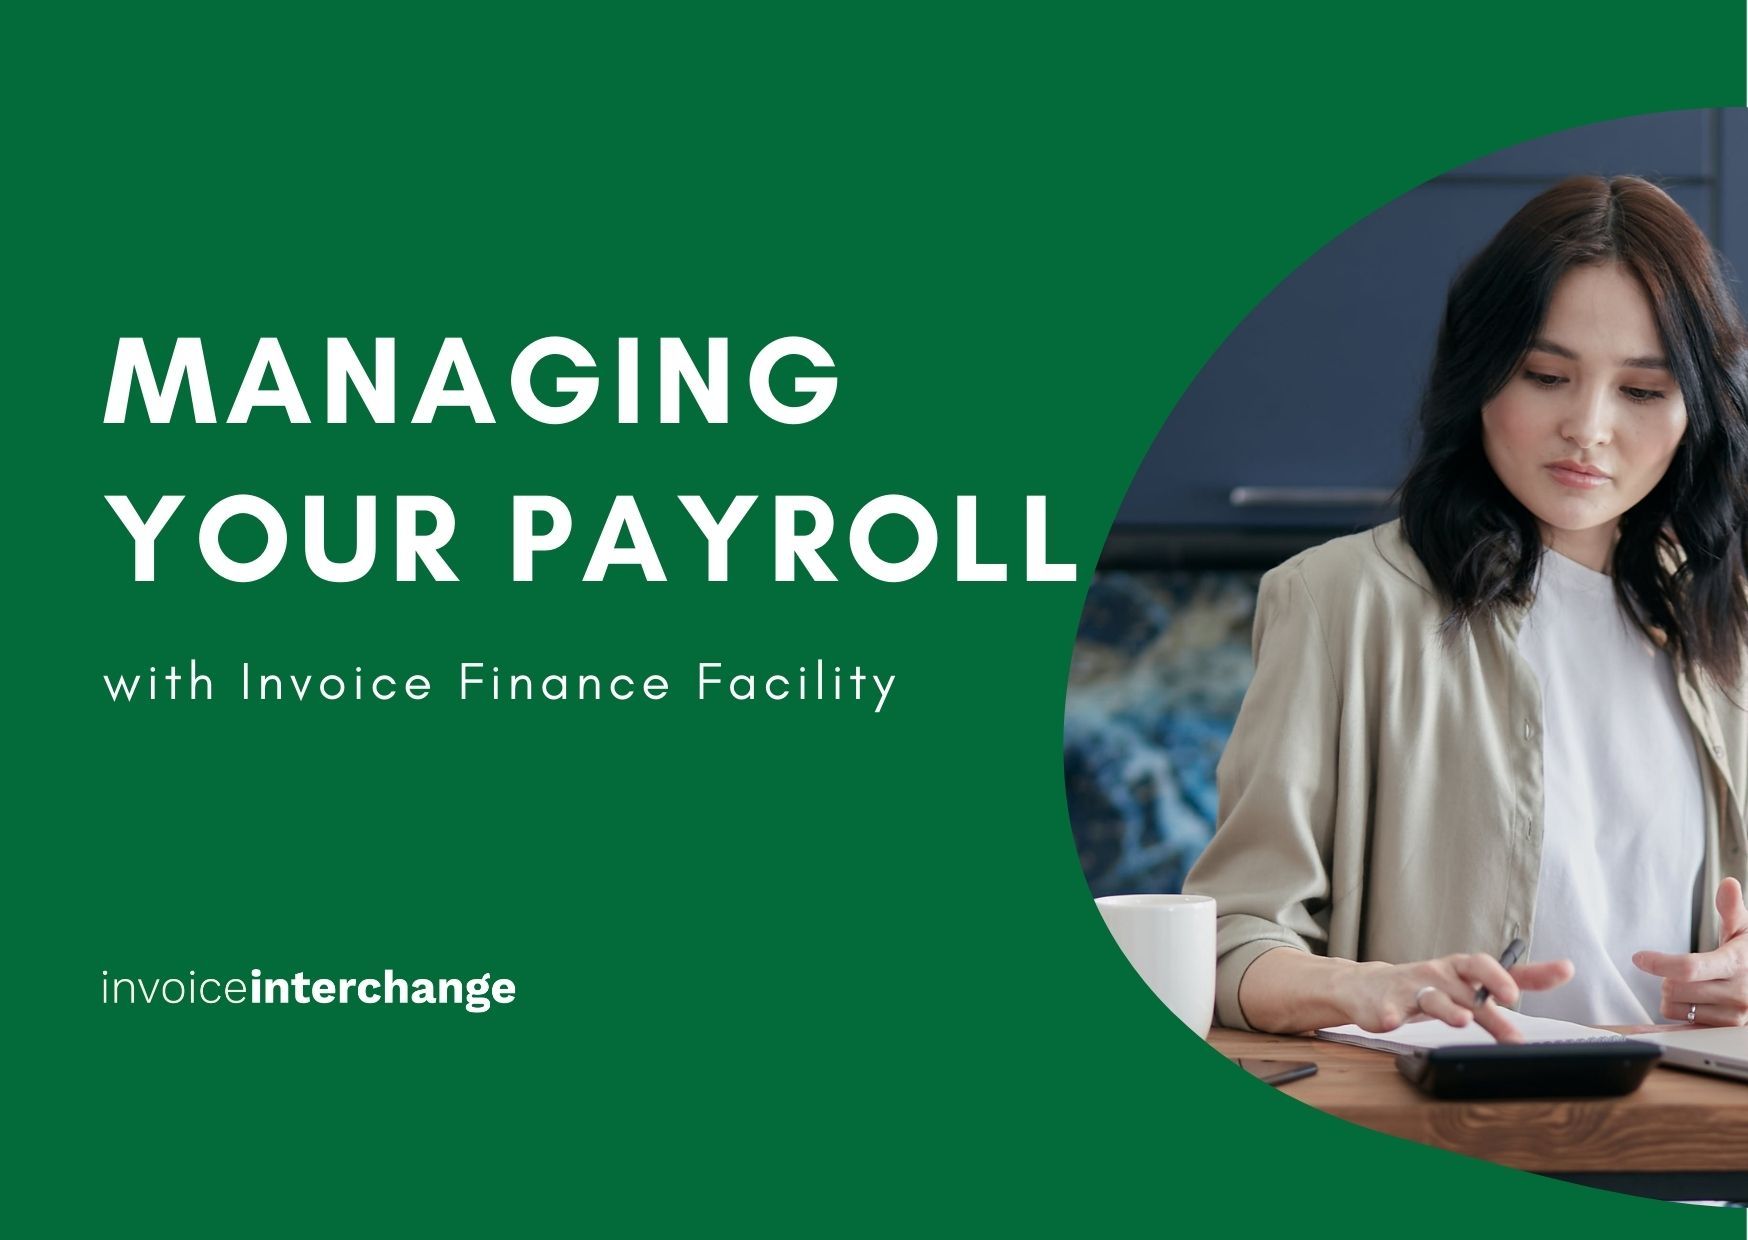 Managing Your Payroll with Invoice Finance Facility